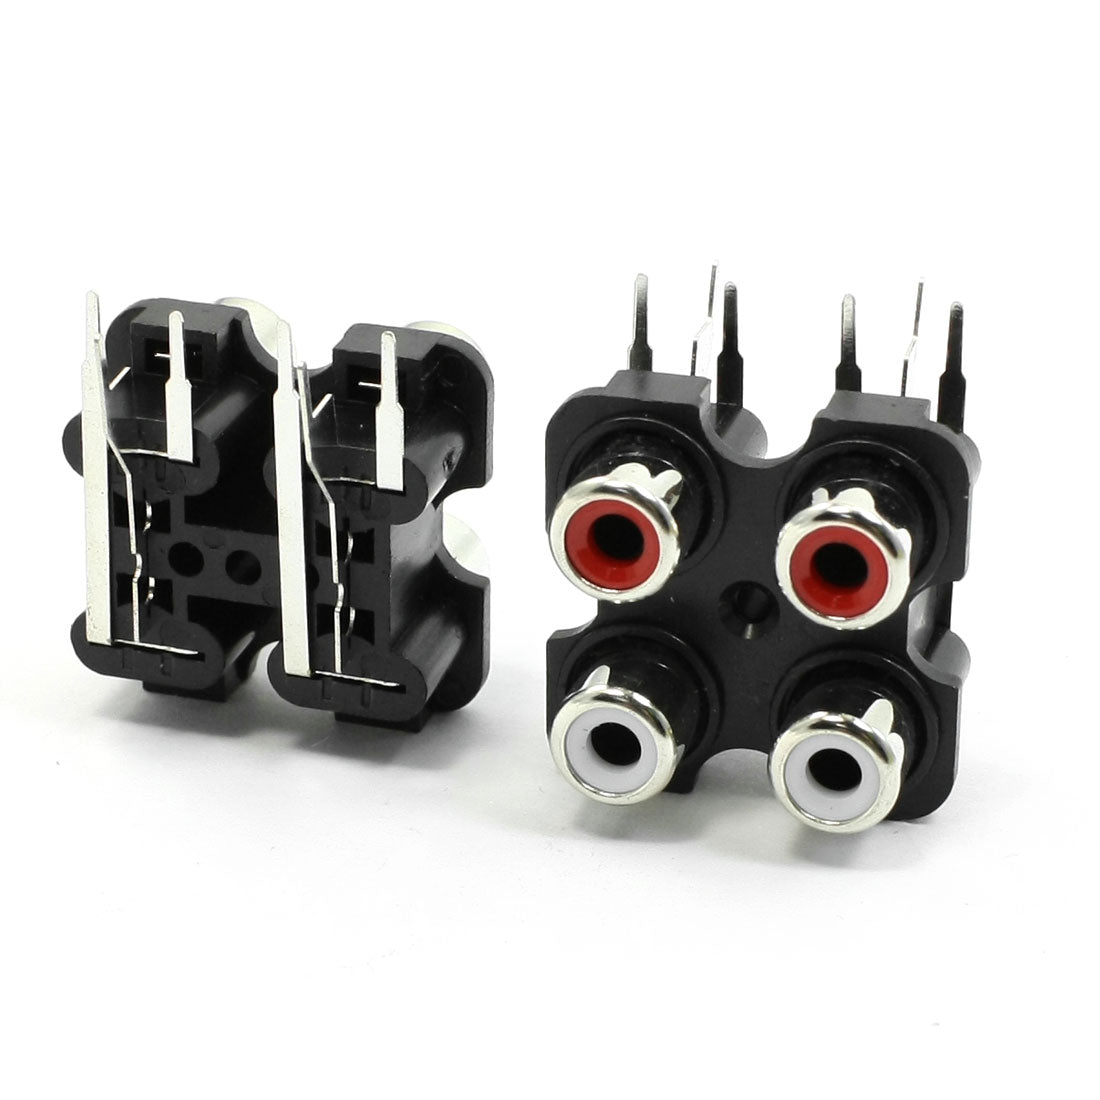 uxcell Uxcell PCB Mount AV Concentric Outlet 4 RCA Female Socket Black Board 2pcs